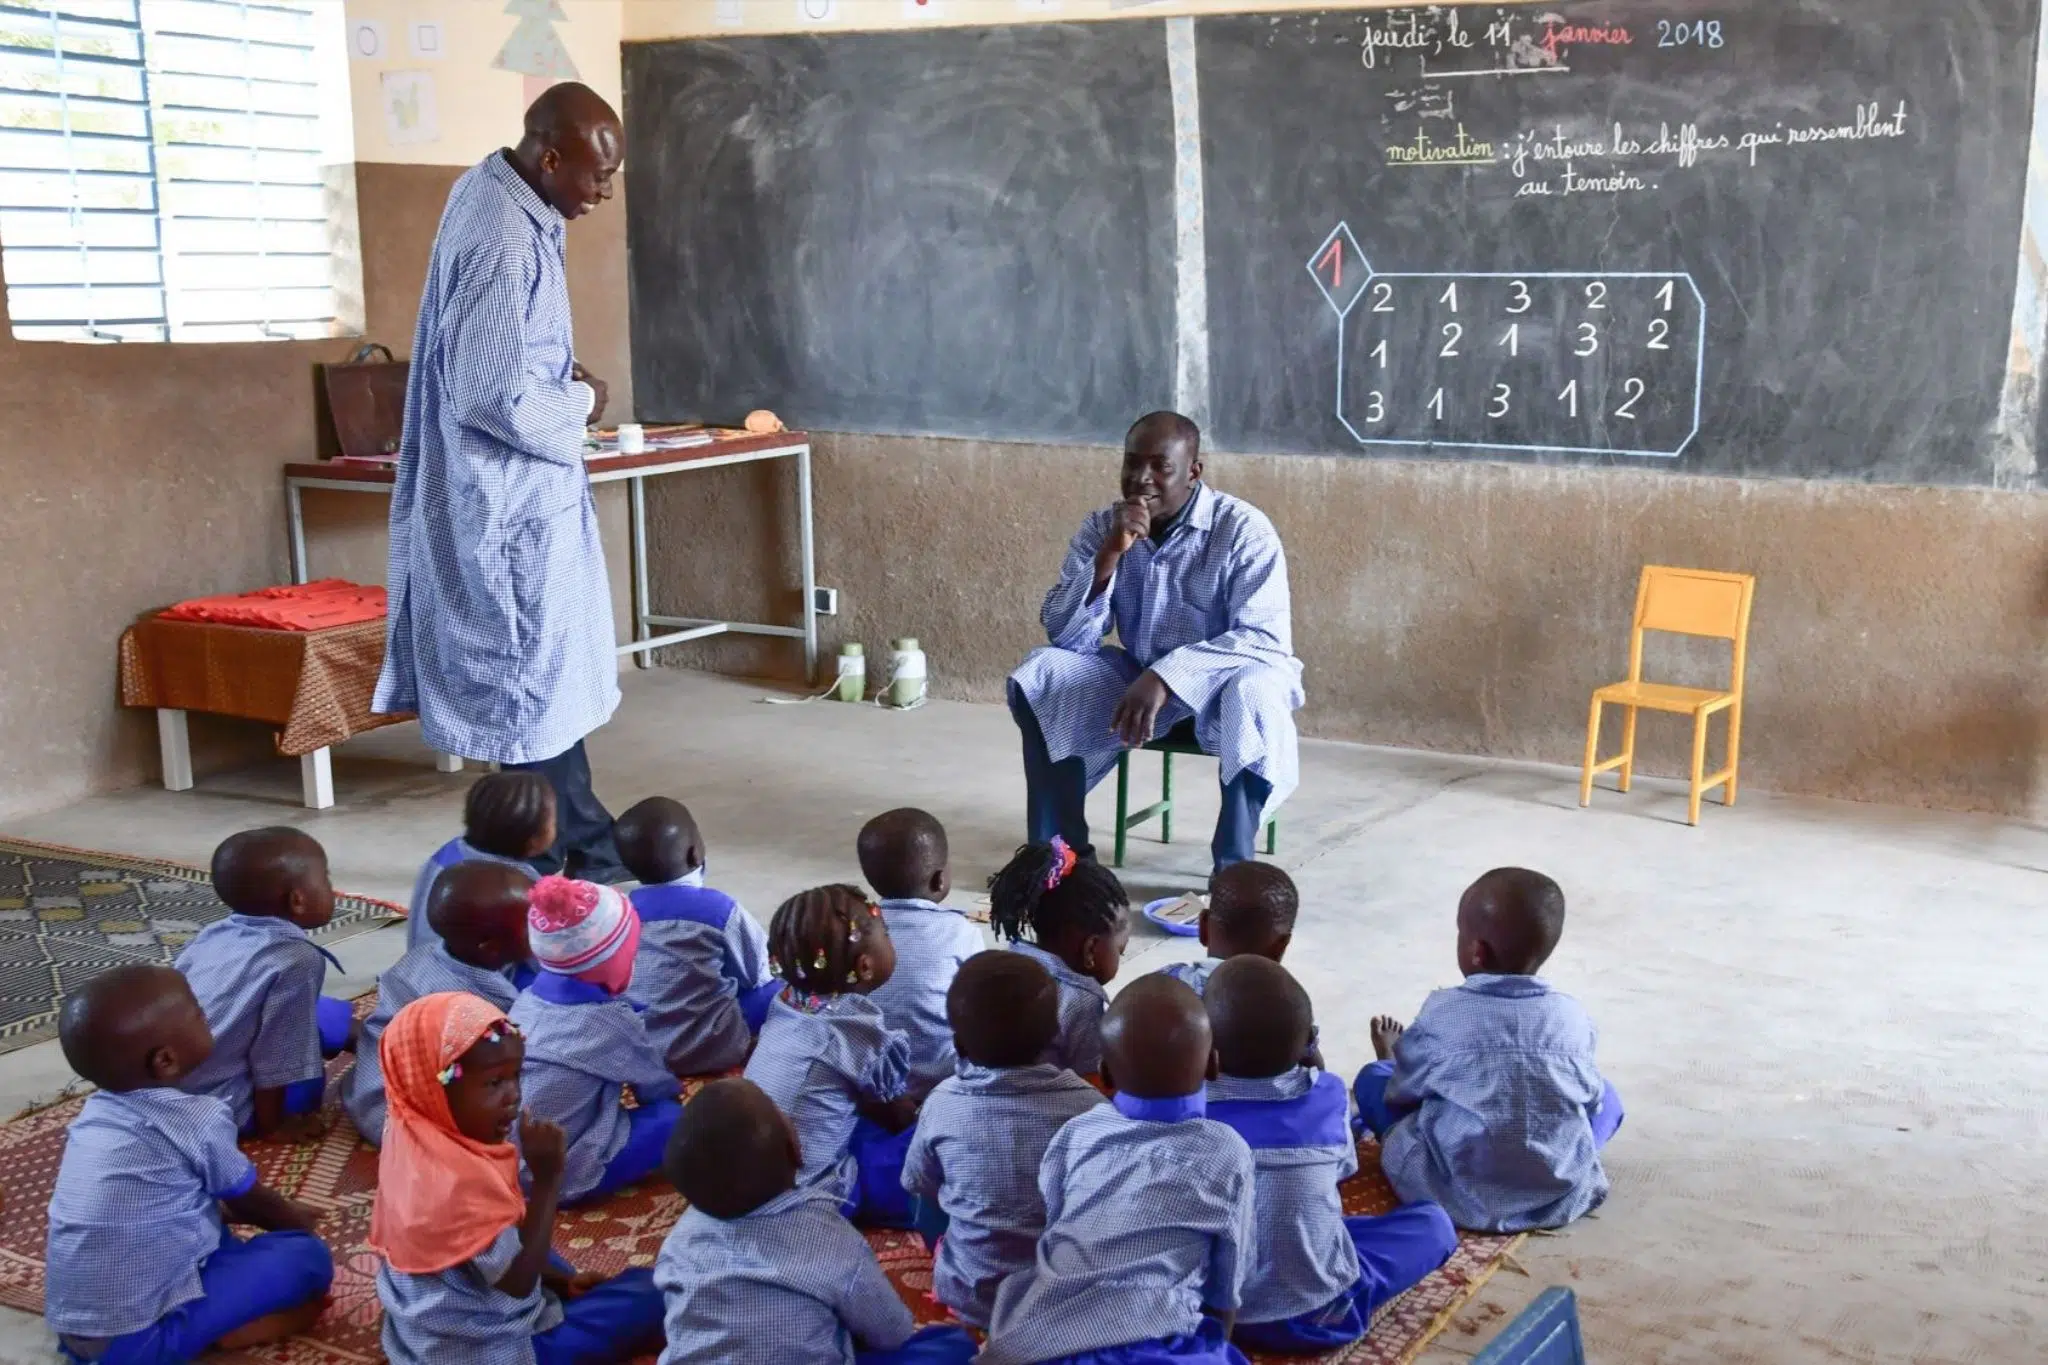 For the quality of education in Burkina Faso